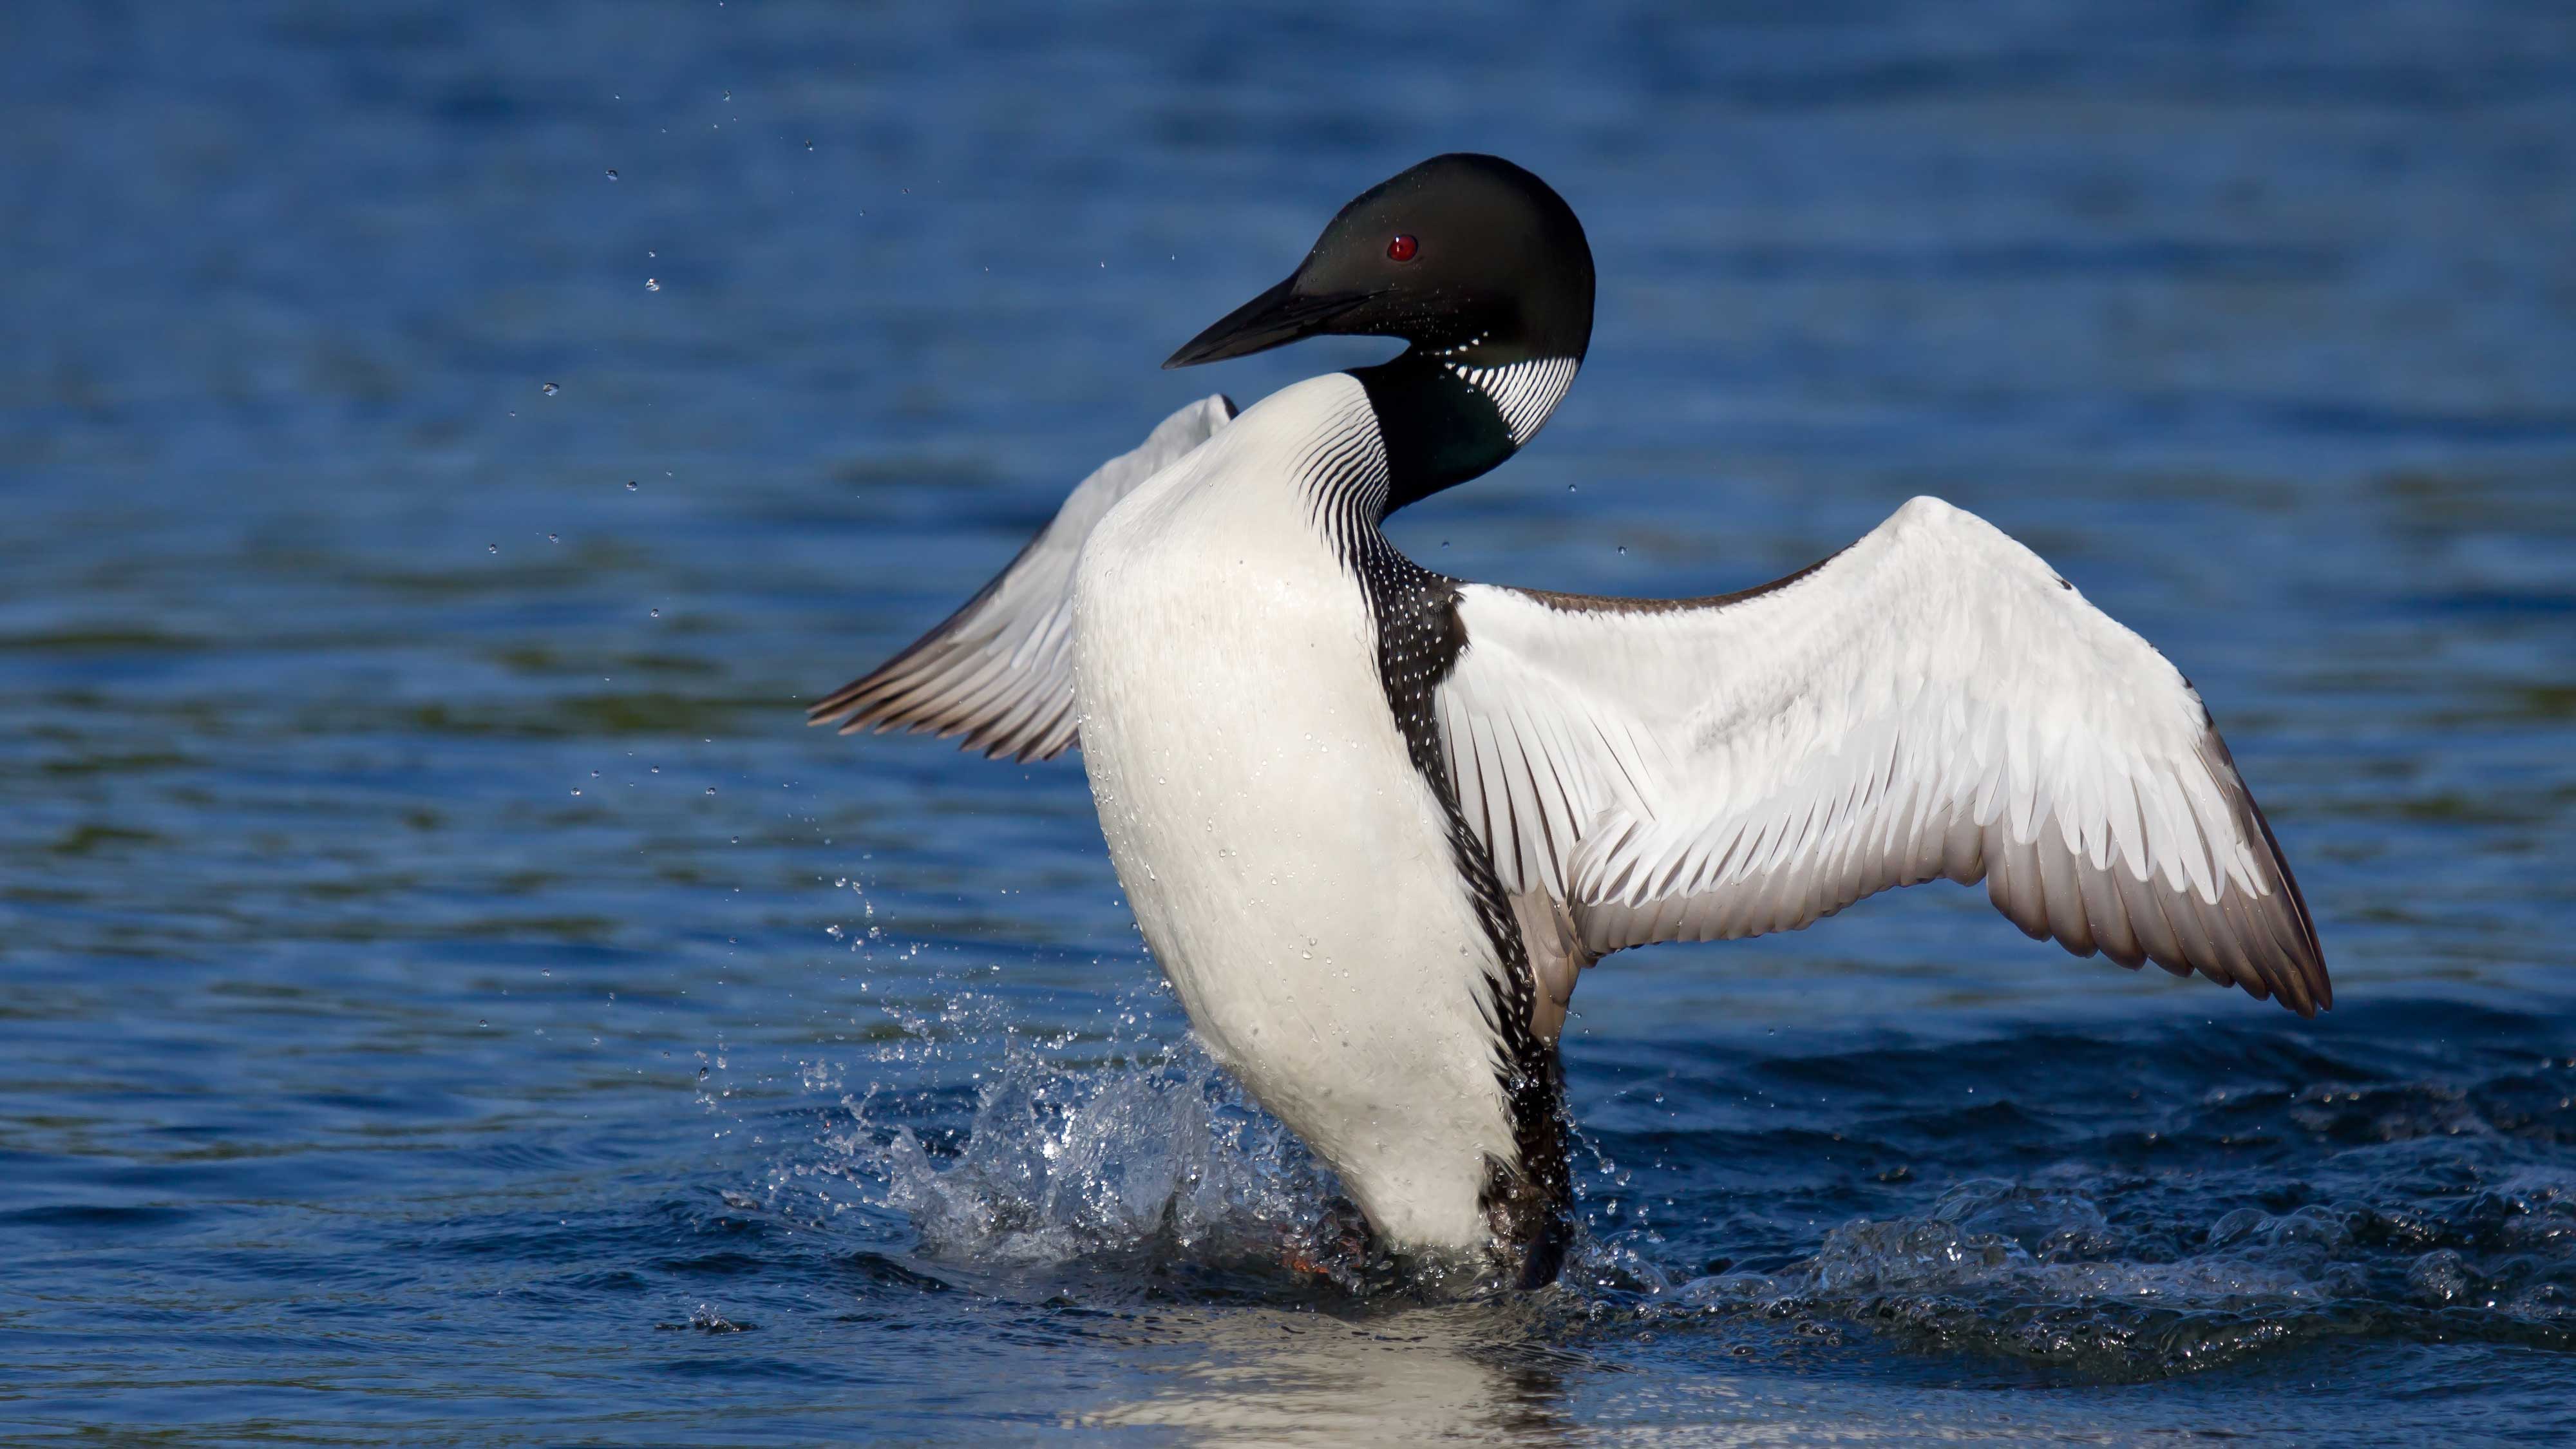 A common loon walking through the water.